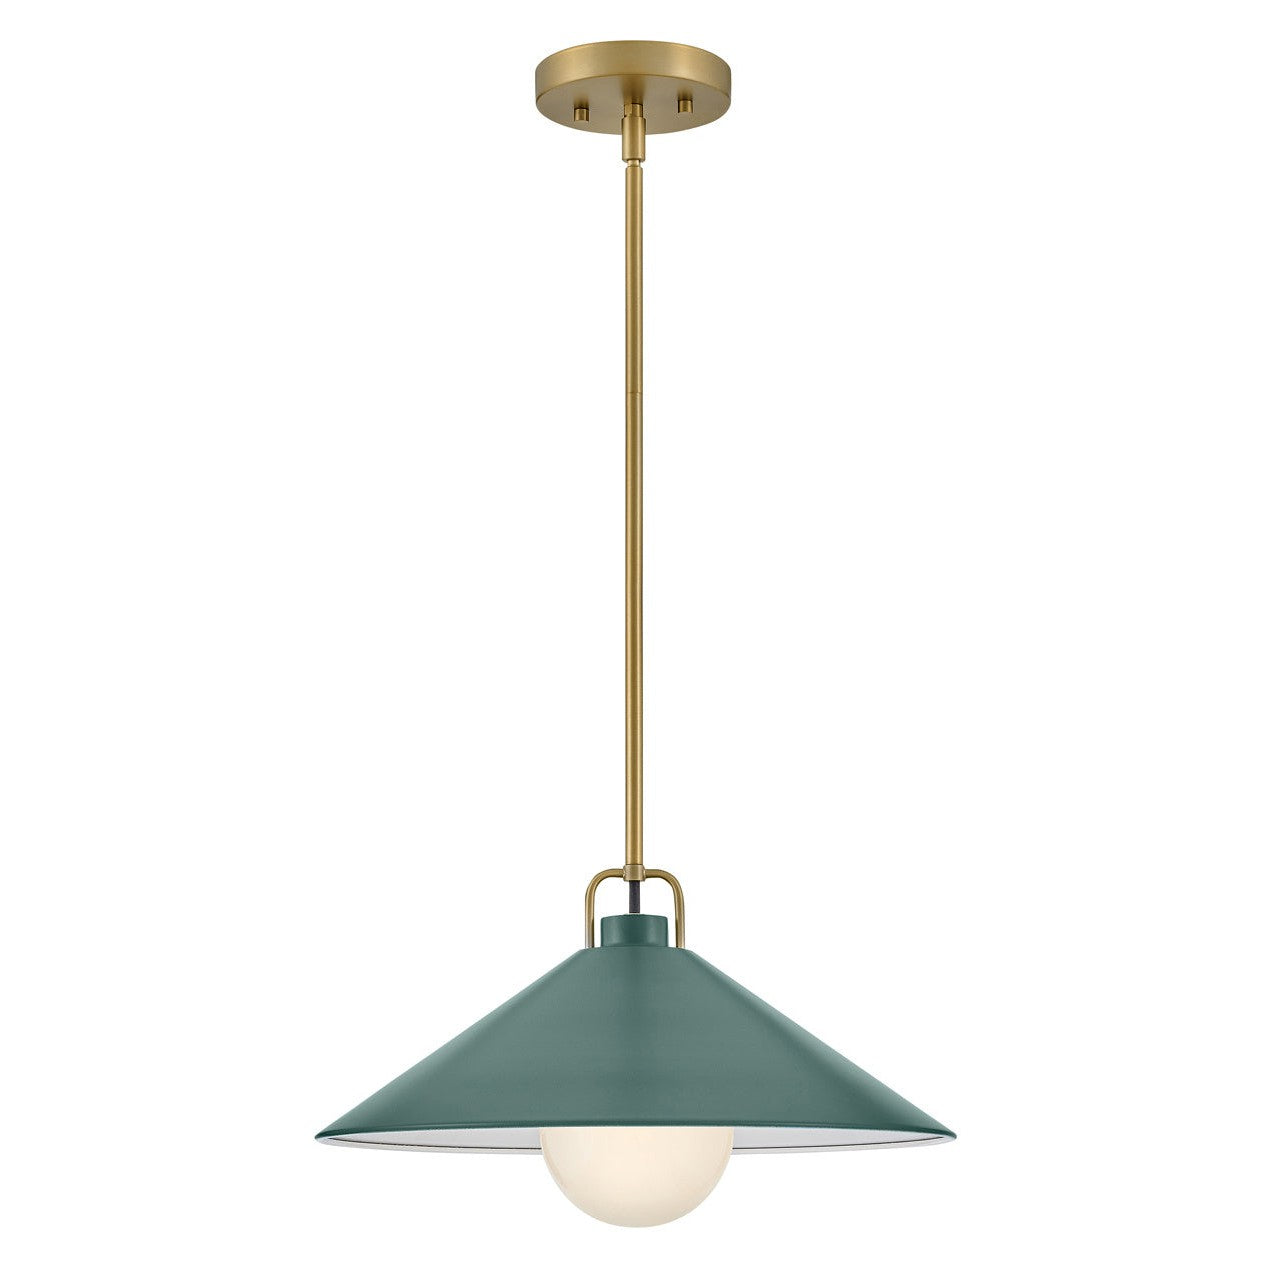 Lark Milo 84437LCB-SG Pendant Light - Lacquered Brass with Sage Green